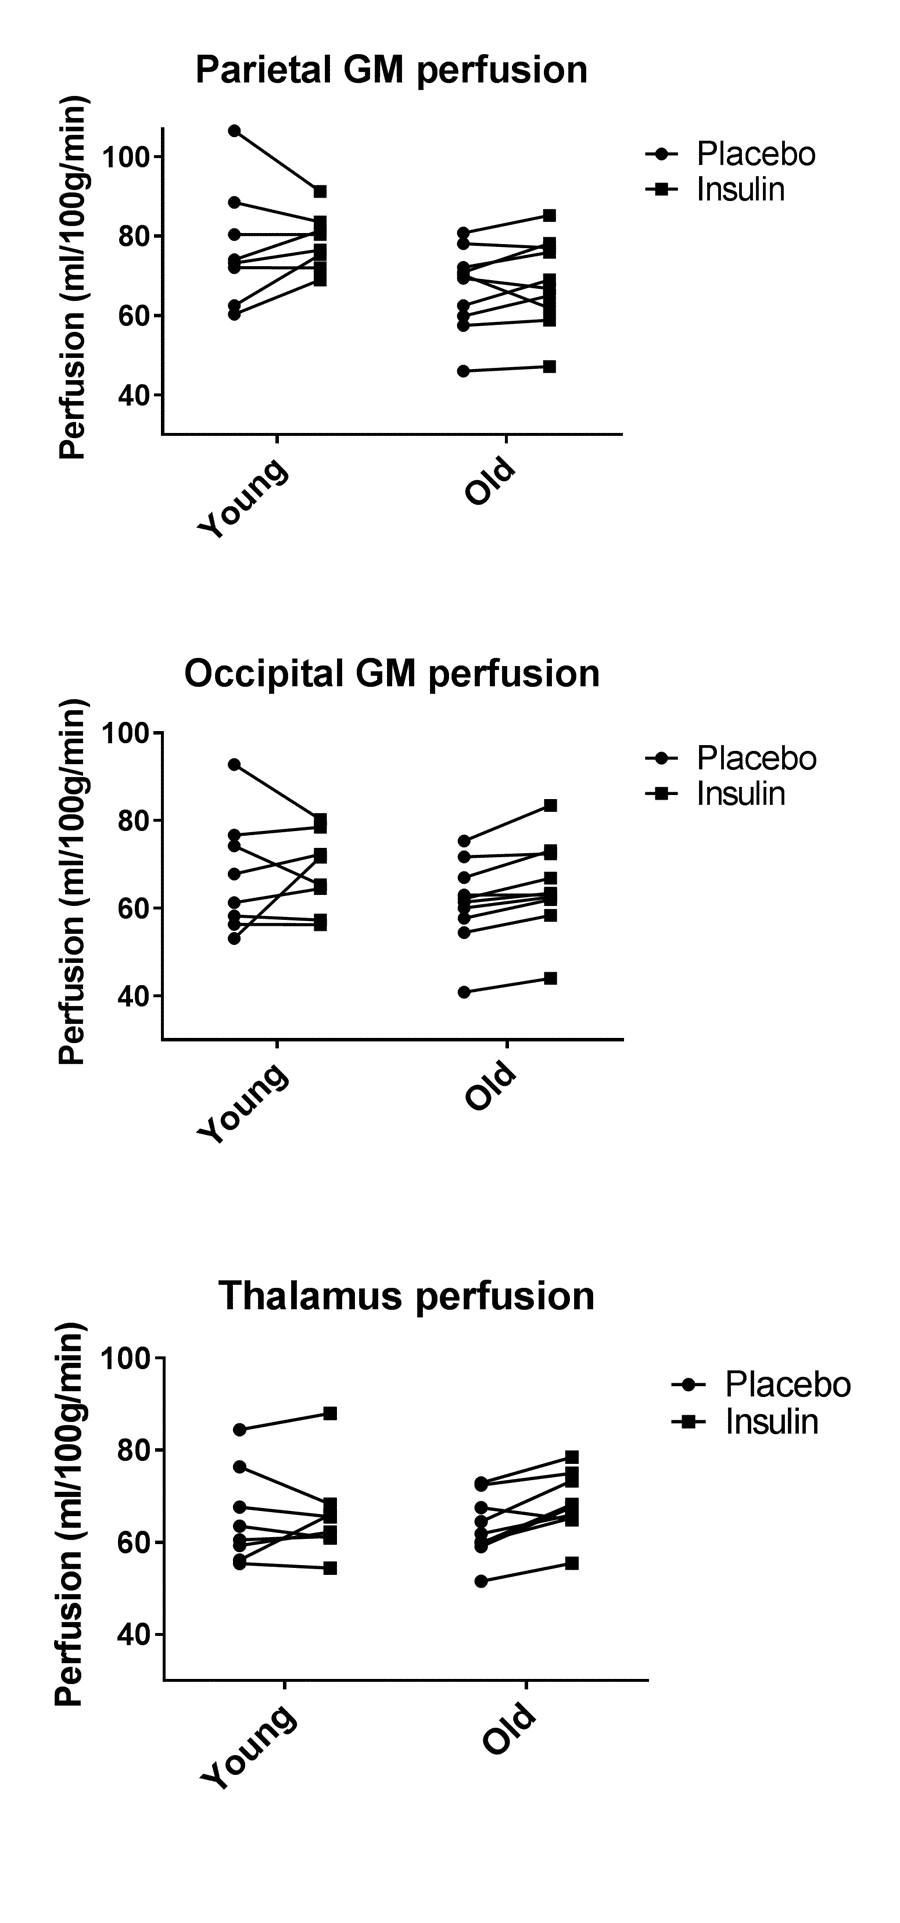 Paired individual gray matter perfusion measurements for placebo and insulin conditions. Left panel represents the gray matter perfusion in the parietal lobe as paired data for placebo and intranasal insulin per individual subject in the young and the older group. The right panel represents the gray matter perfusion in the occipital lobe.